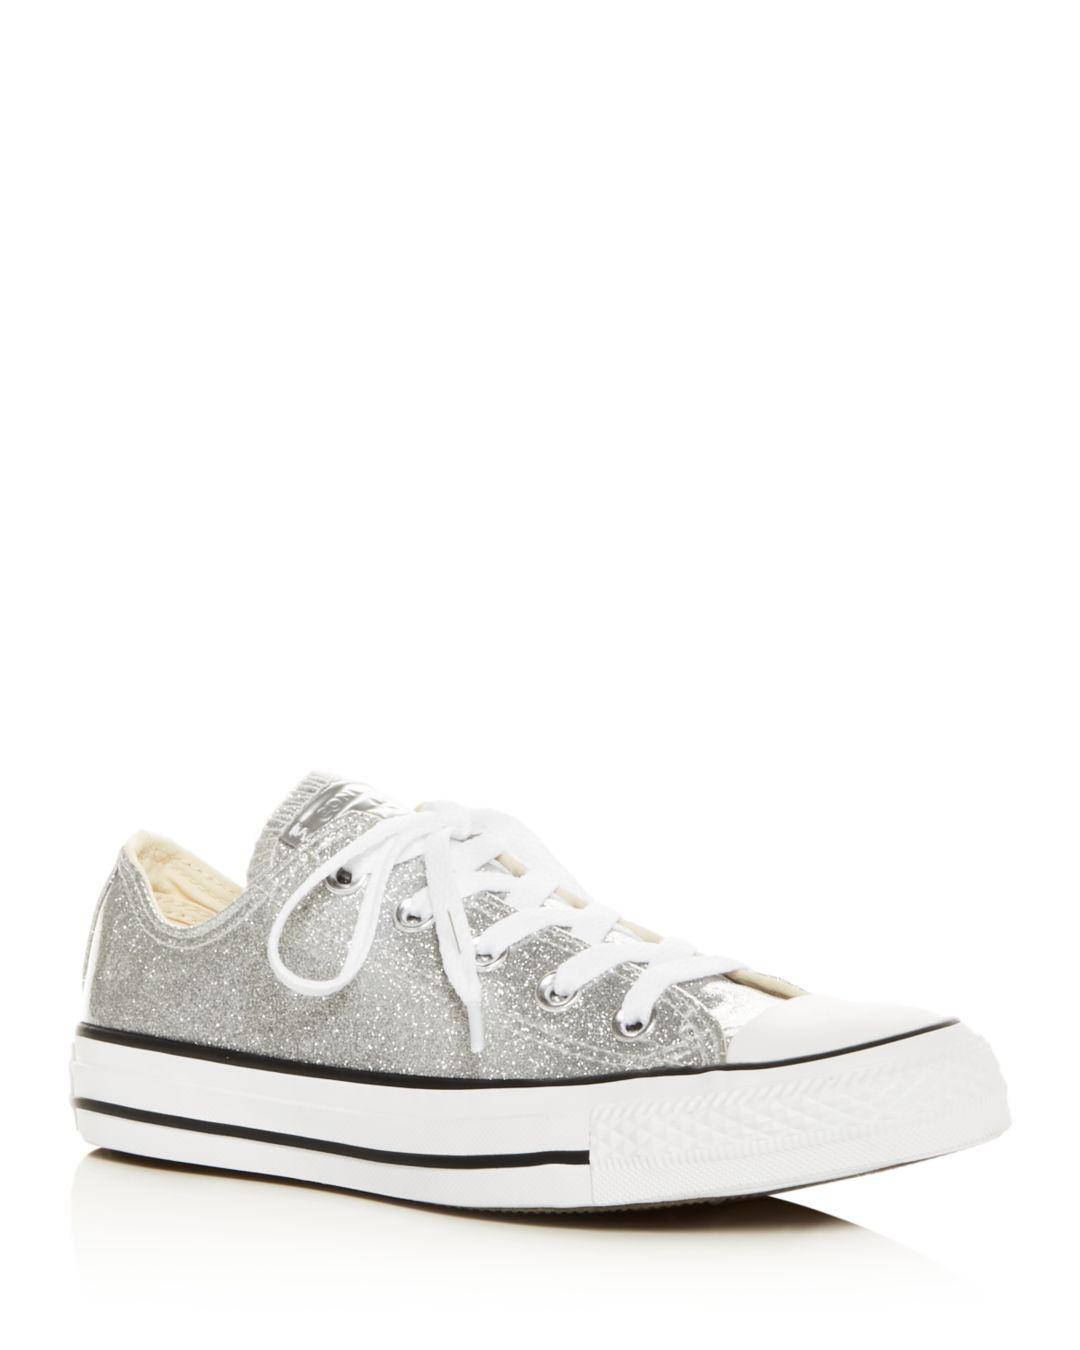 Converse Women's Chuck Taylor All Star Glitter Low-top Sneakers in  Silver/White (White) - Lyst